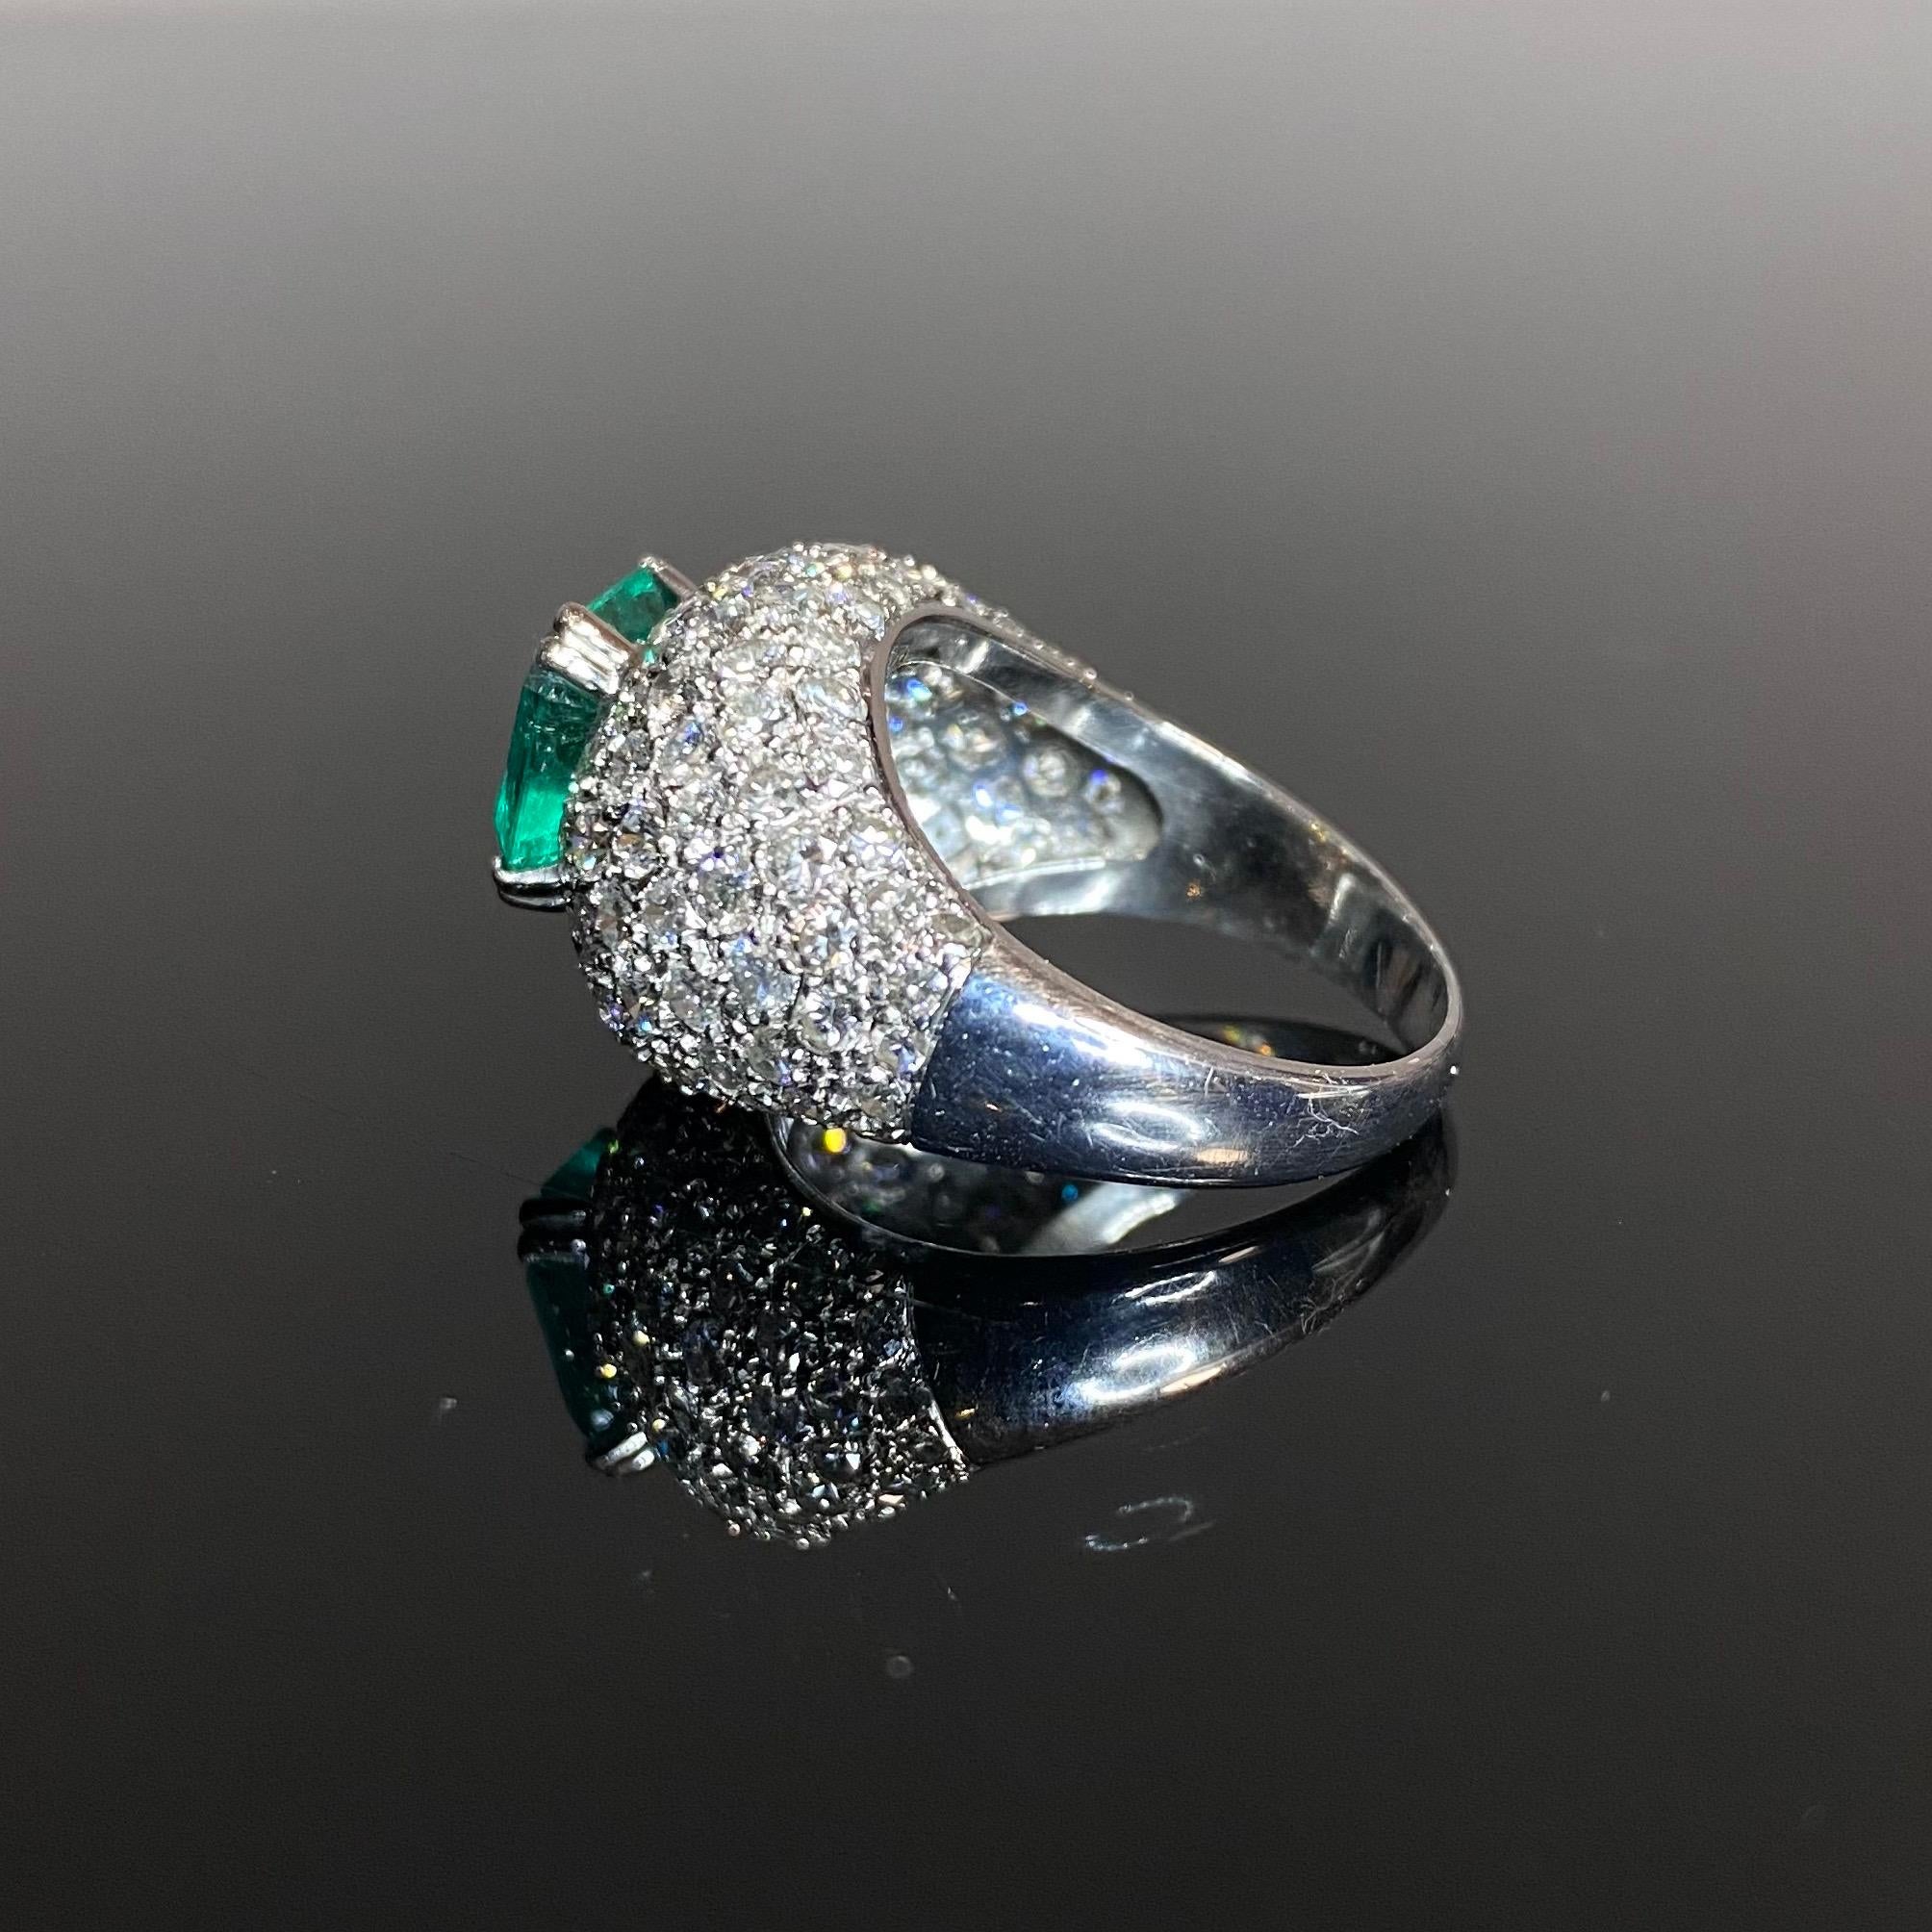 Vintage 1960s/1970s Colombian Emerald Diamond Bombe Cocktail Ring Platinum 10